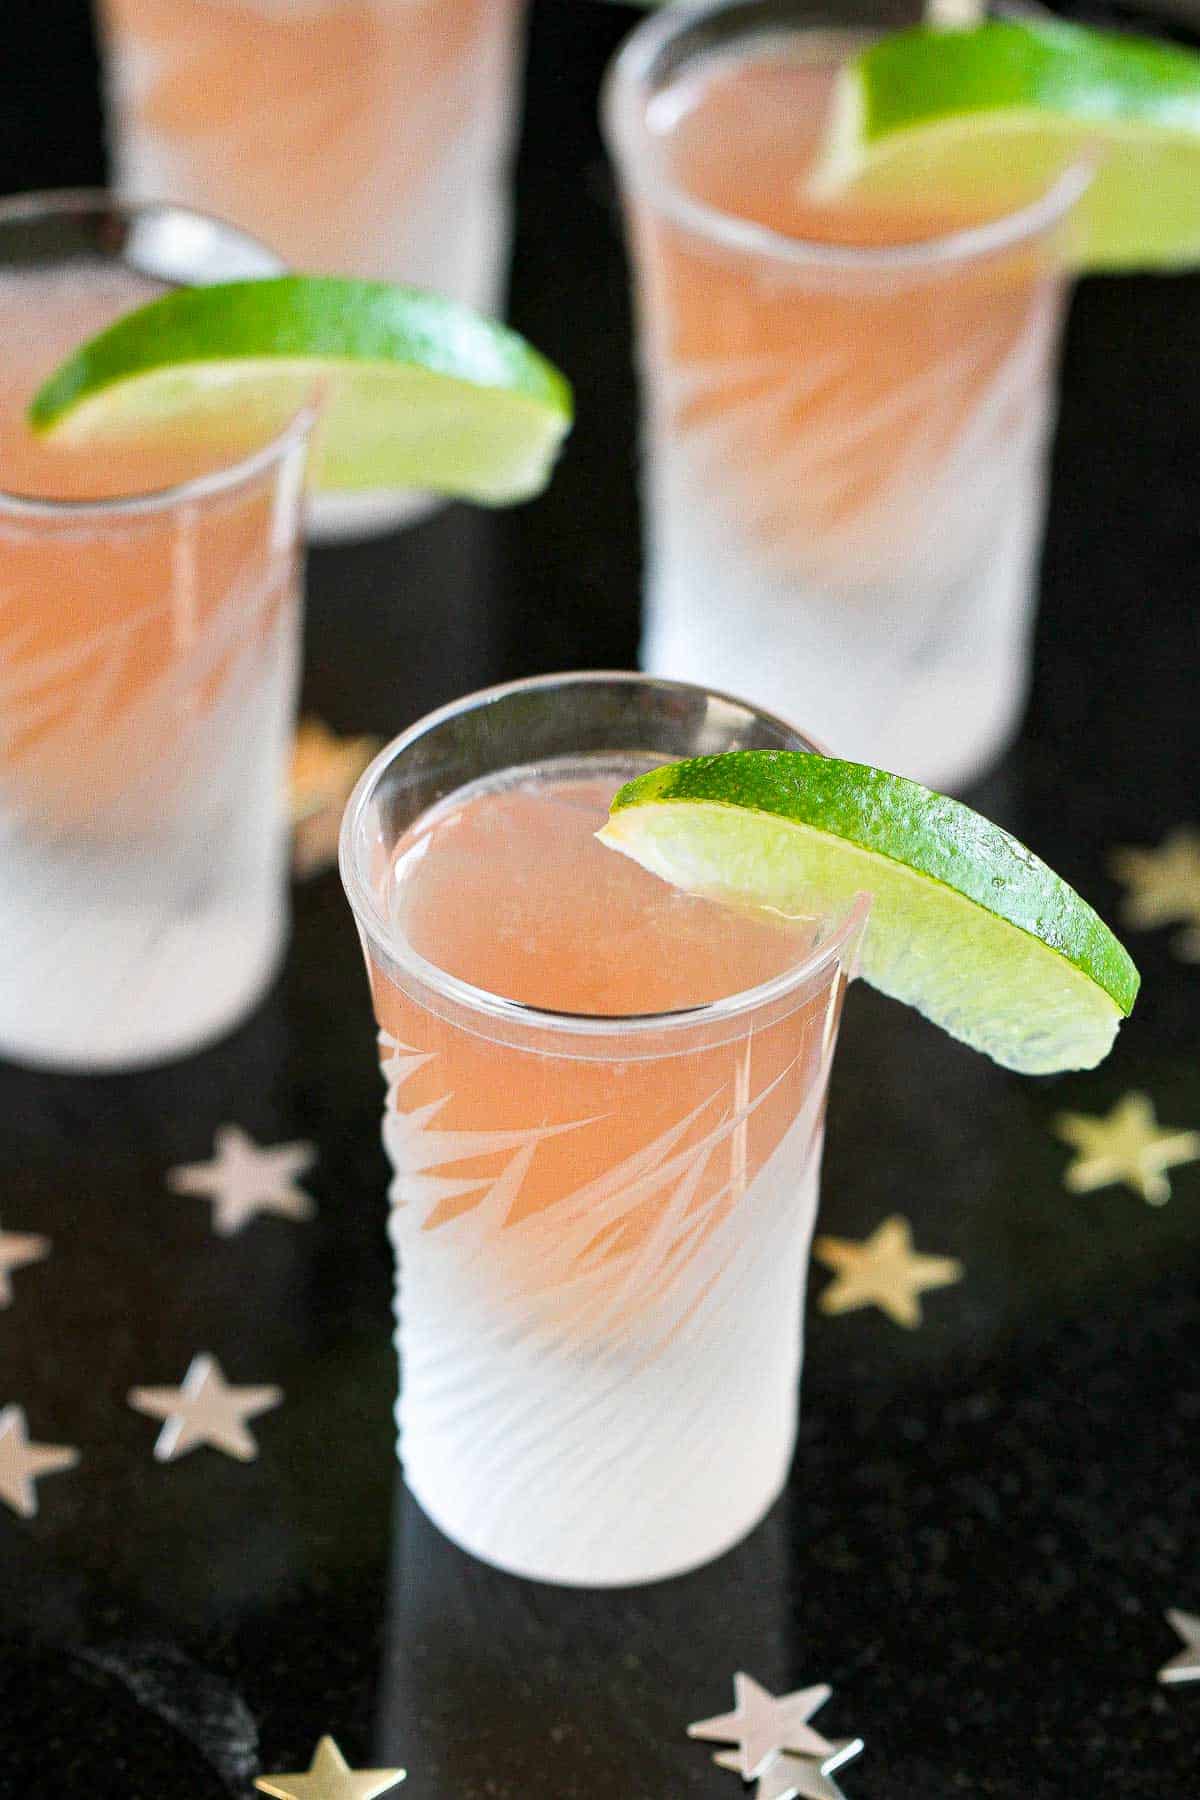 Cut glass shot glasses filled with vodka cranberry kamikaze shots, with lime wedges.